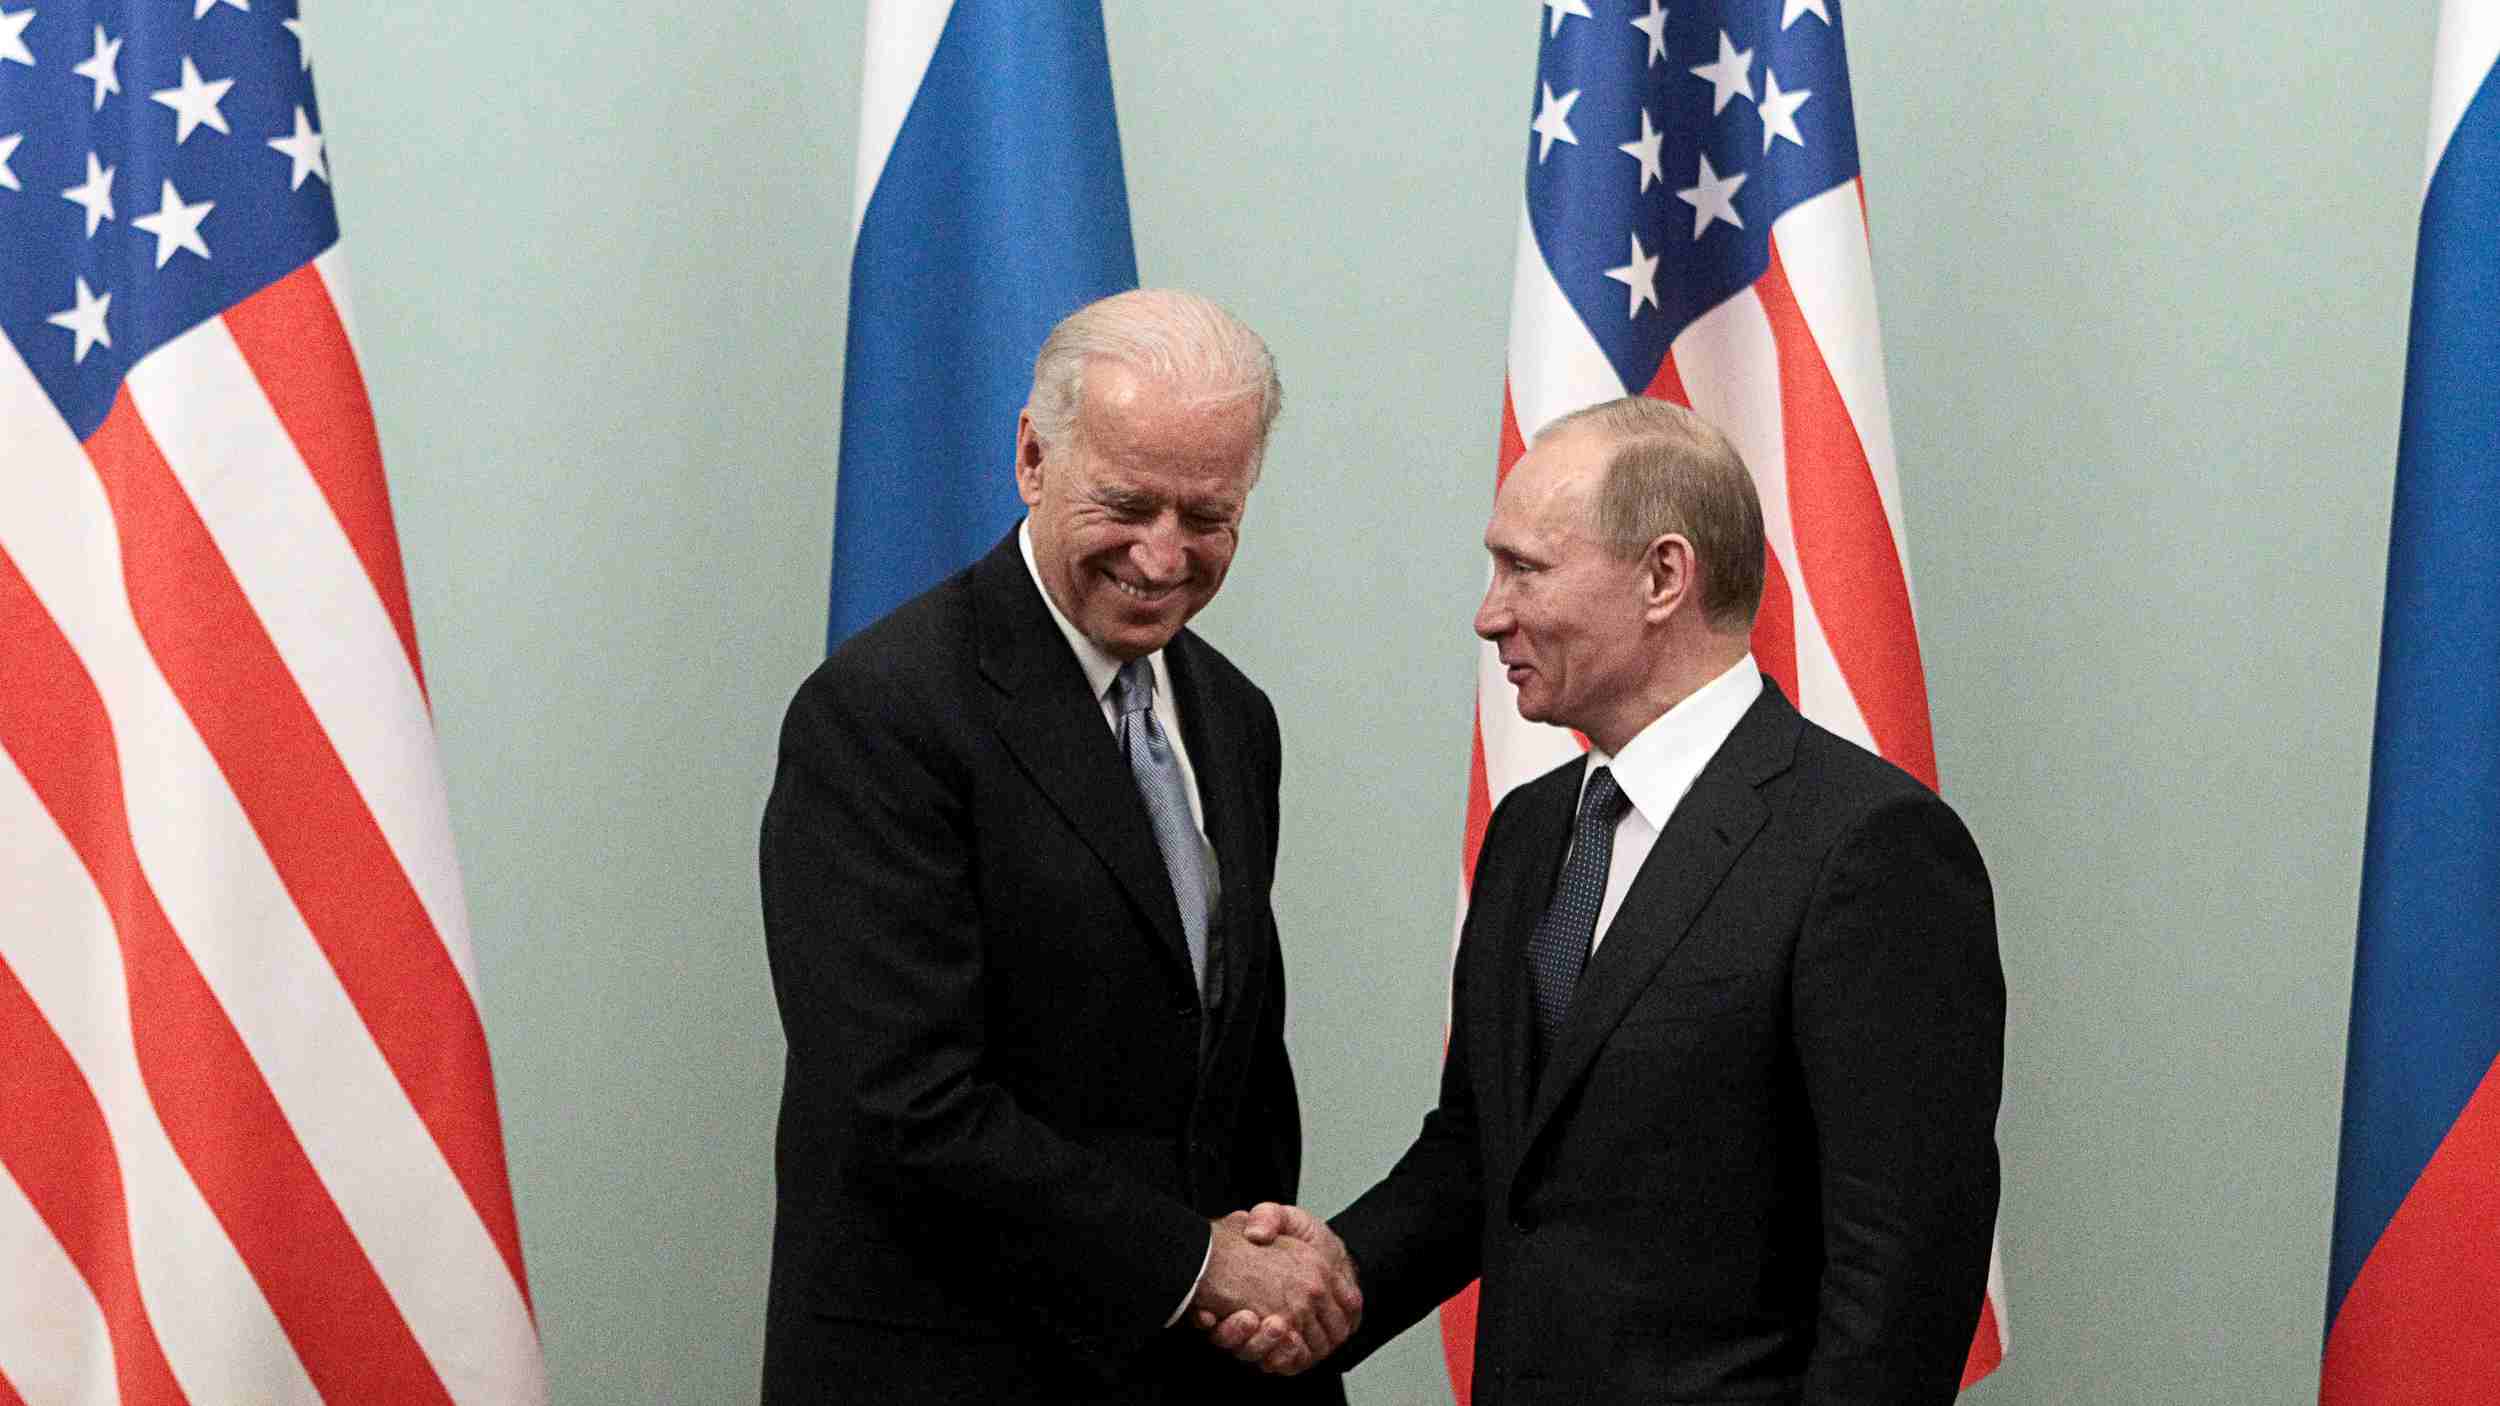 Photo: Russian Prime Minister Vladimir Putin (R) shakes hands with U.S. Vice President Joe Biden during their meeting in Moscow March 10, 2011. Credit: REUTERS/Alexander Natruskin/File Photo